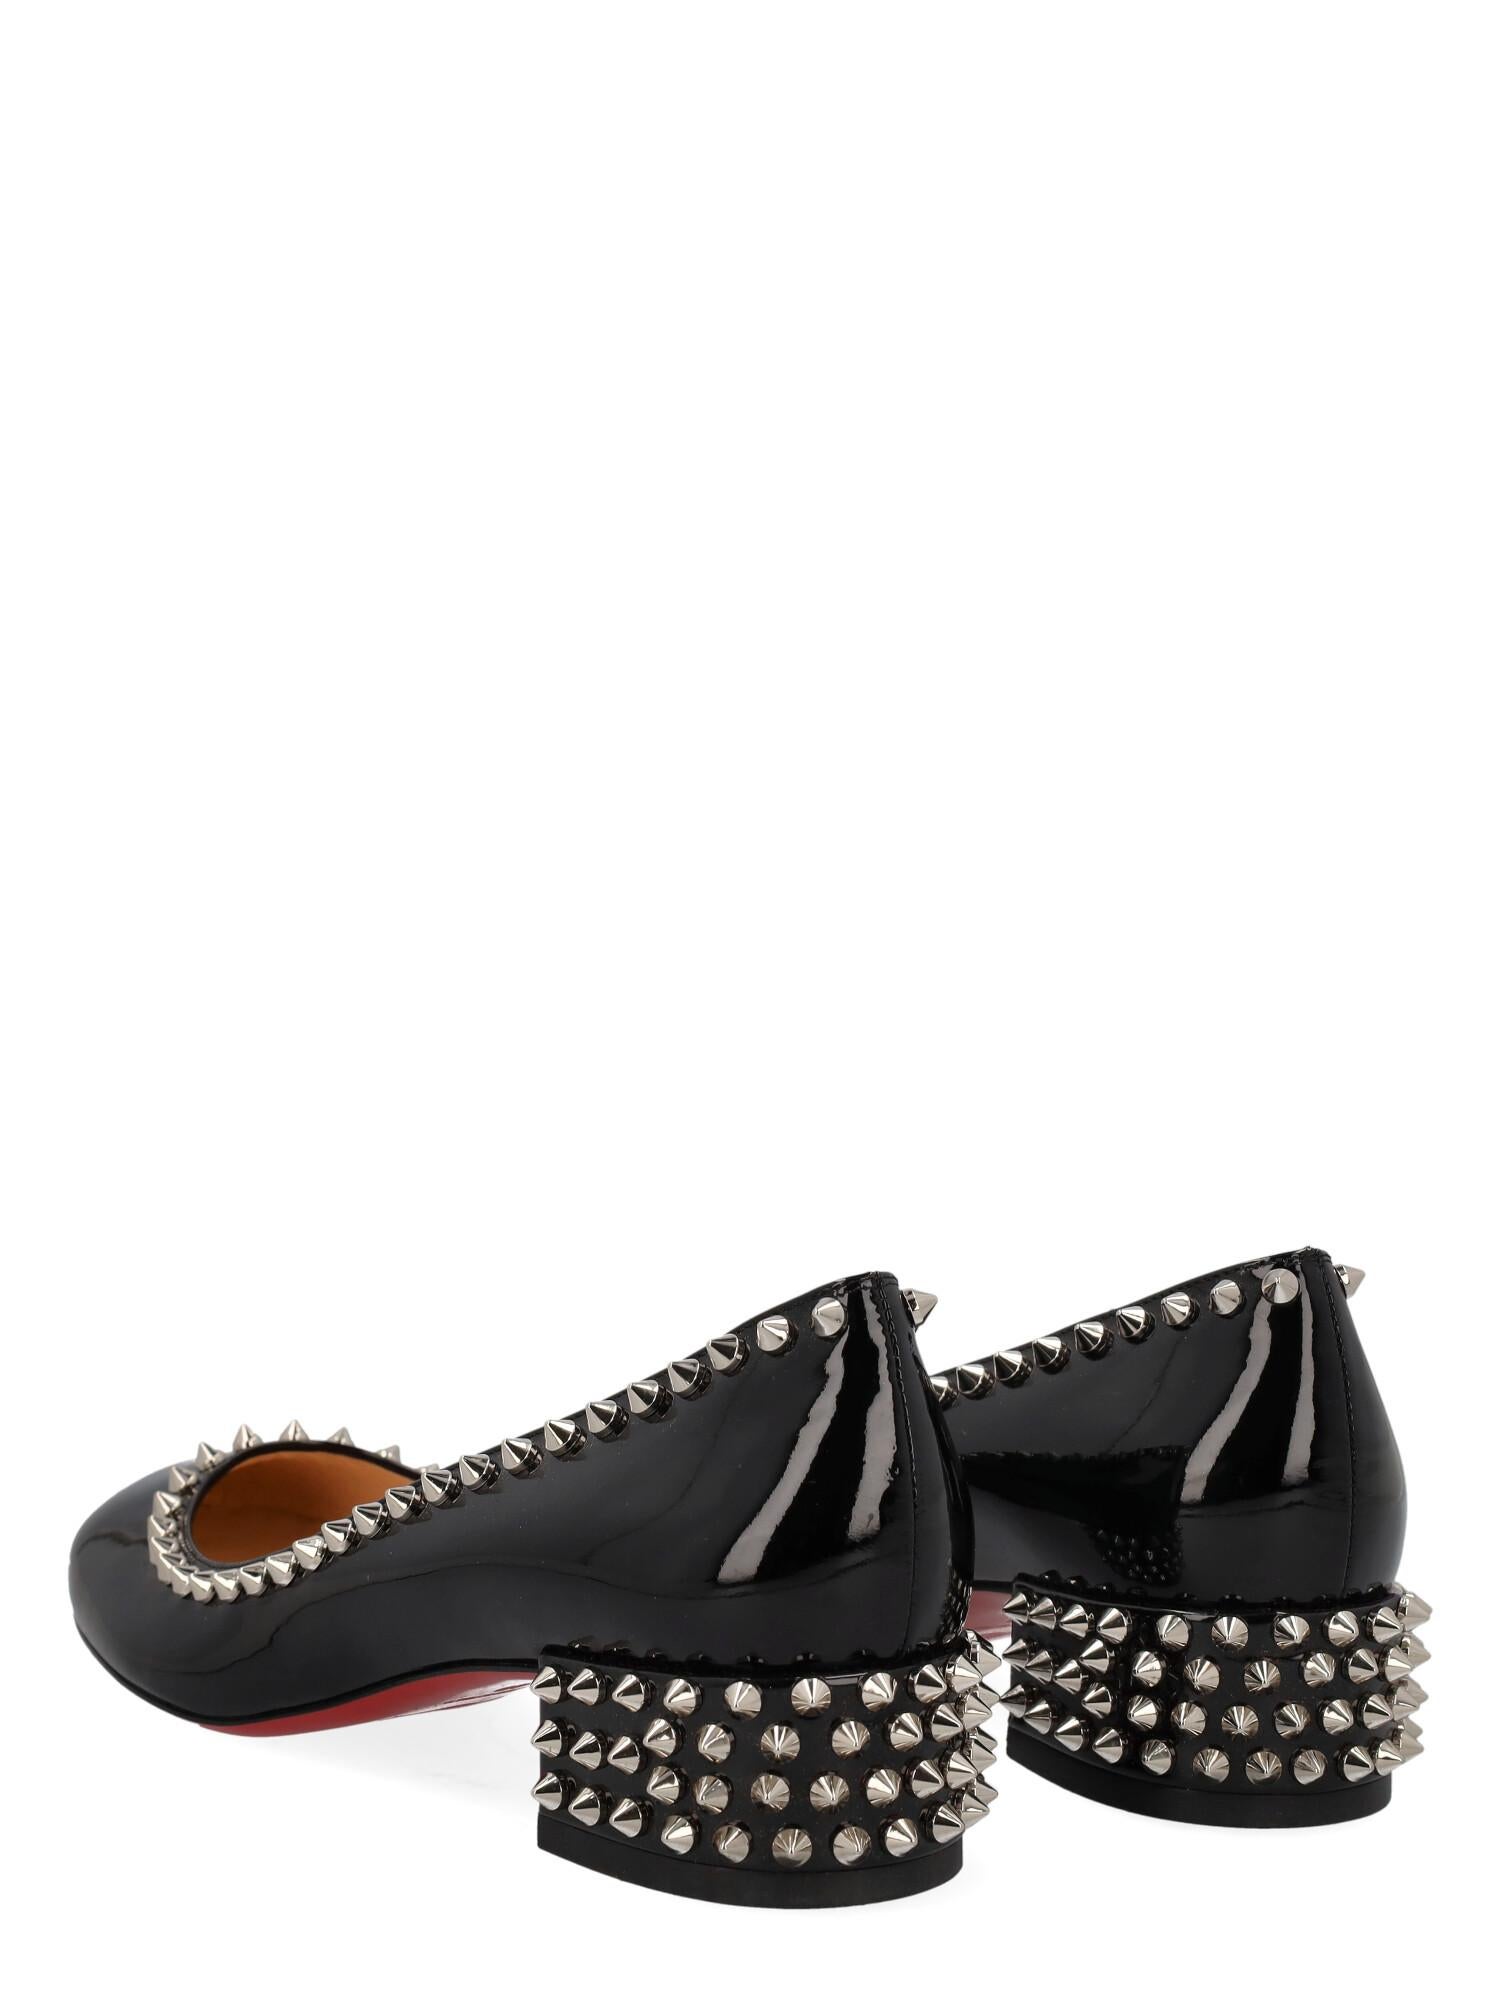 Christian Louboutin Women Ballet flats Black Leather EU 40 In Good Condition For Sale In Milan, IT